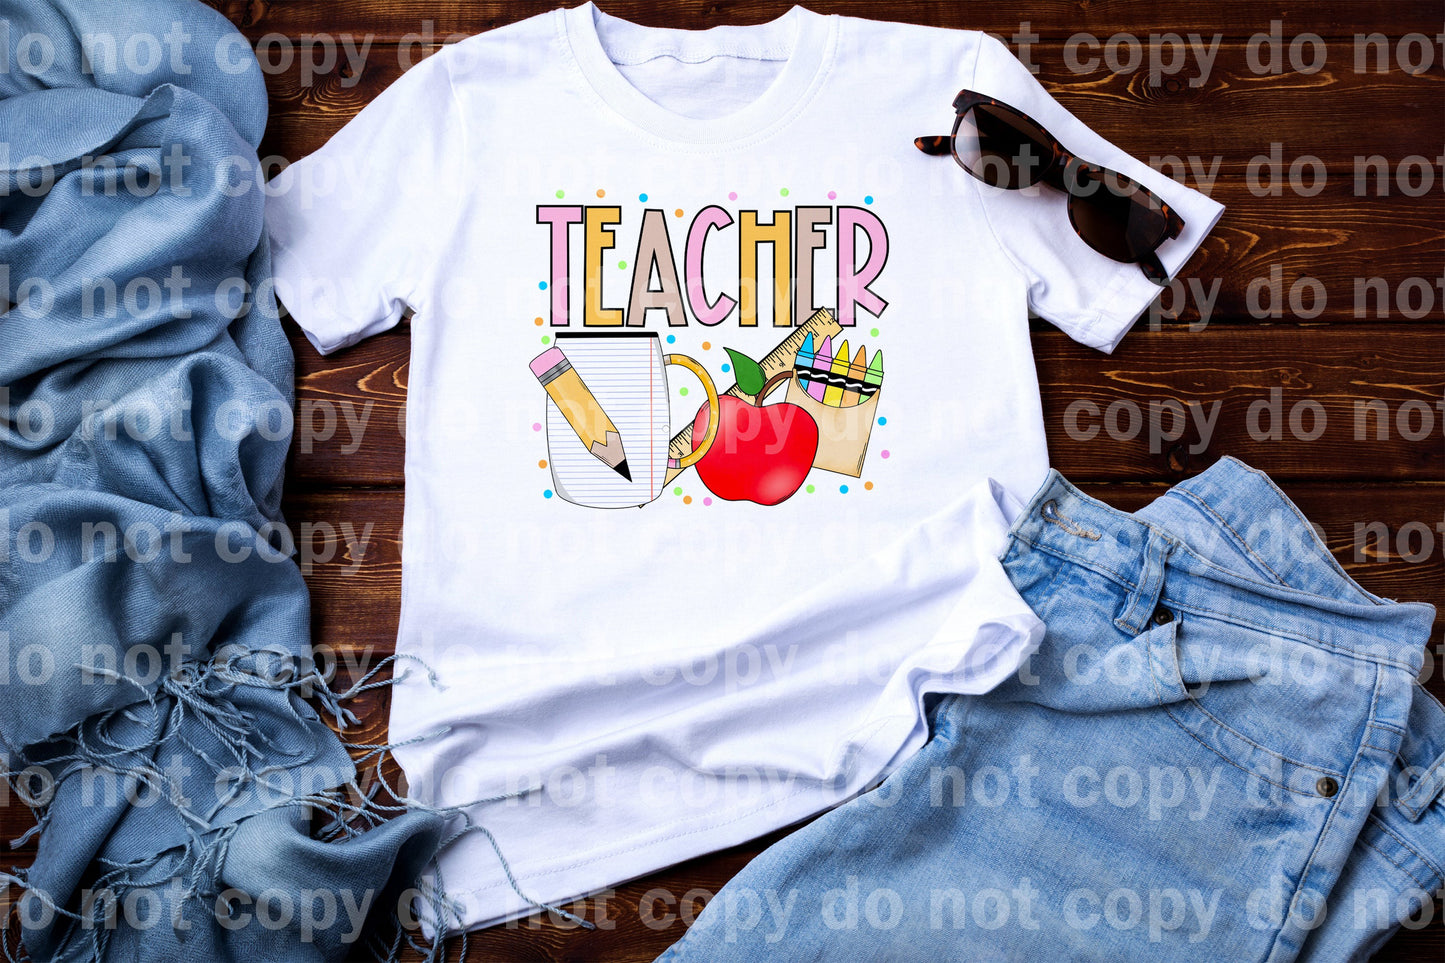 Teacher School Supplies with Optional Two Rows Sleeve Designs Dream Print or Sublimation Print